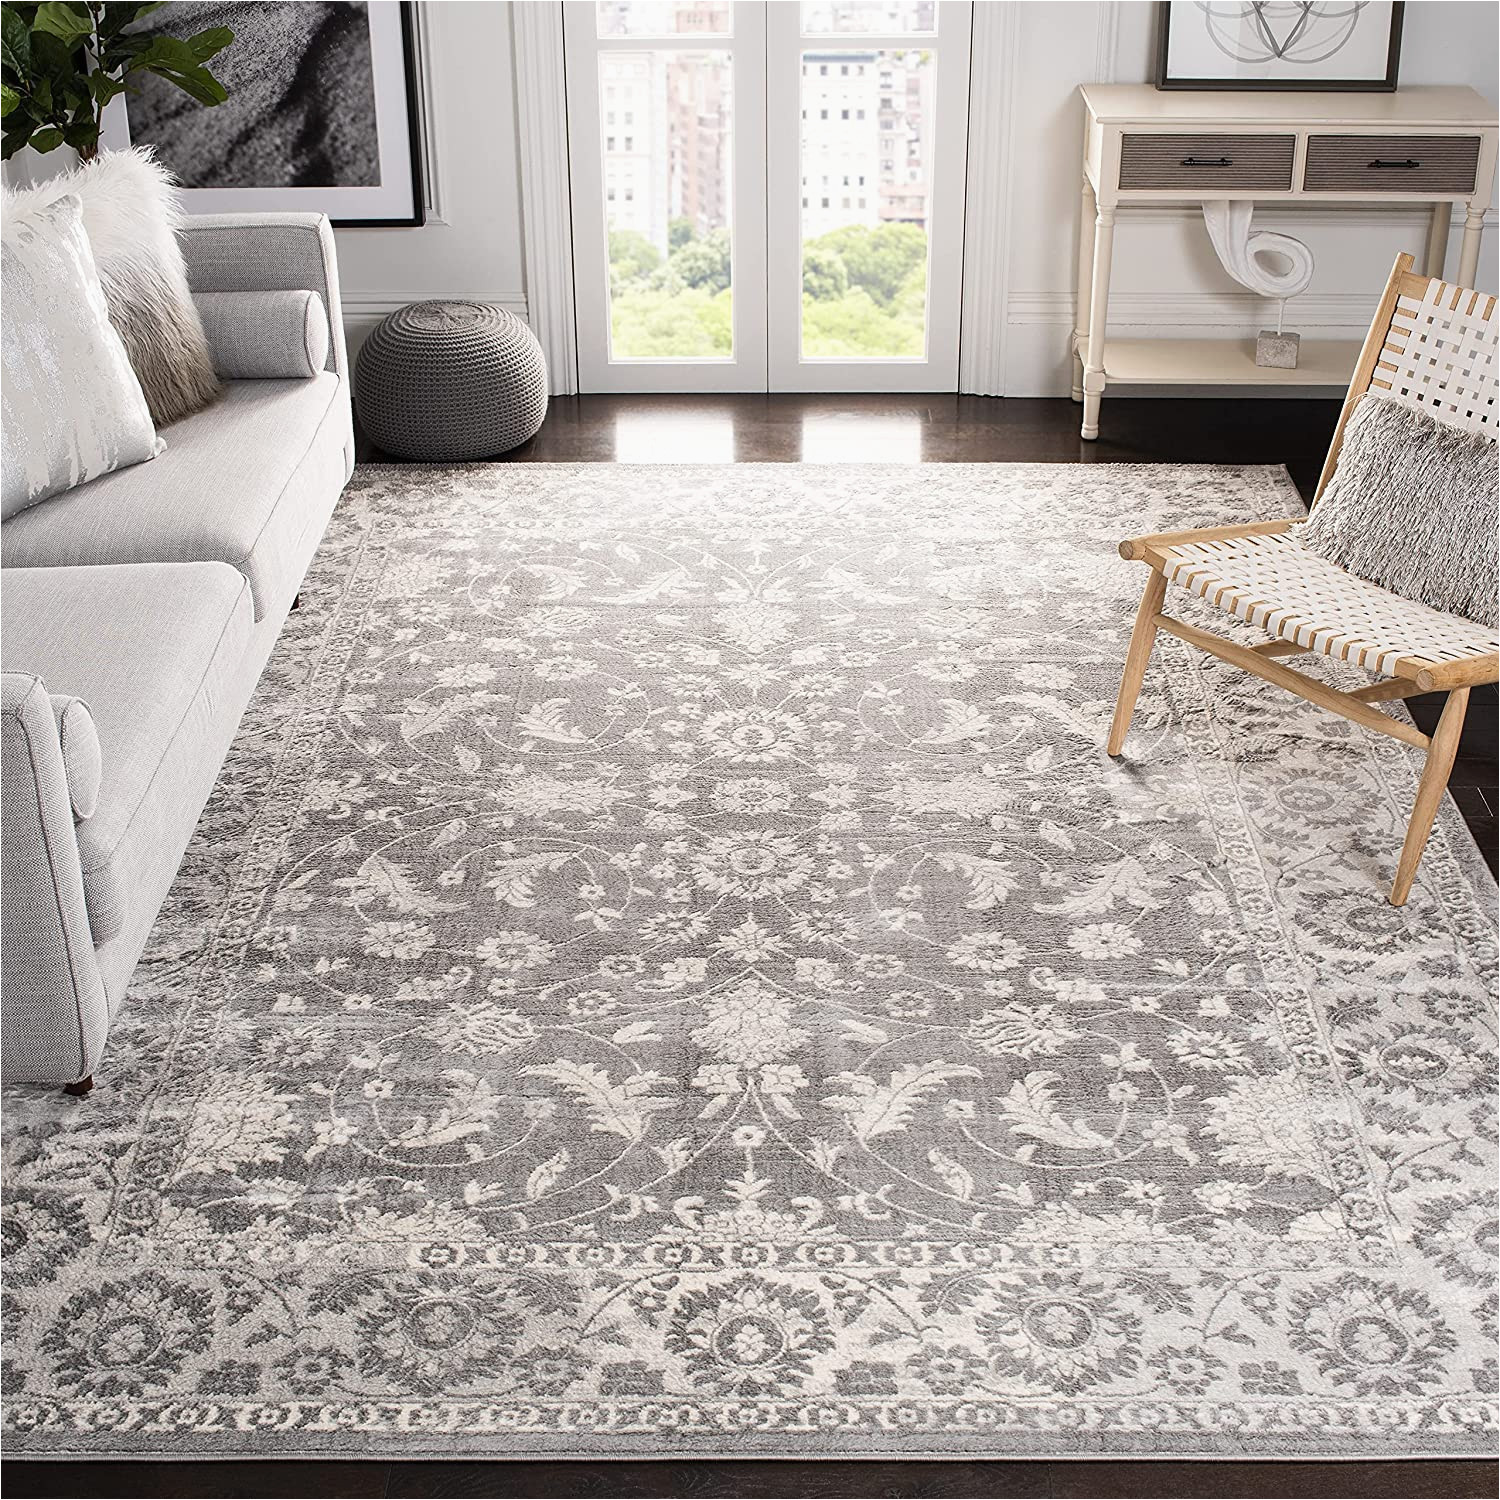 13 X 14 area Rugs Safavieh Traditional Indoor Woven Square area Rug, Brentwood Collection, Bnt844, In Cream / Grey, 201 X 201 Cm for Living Room, Bedroom or Any Indoor …